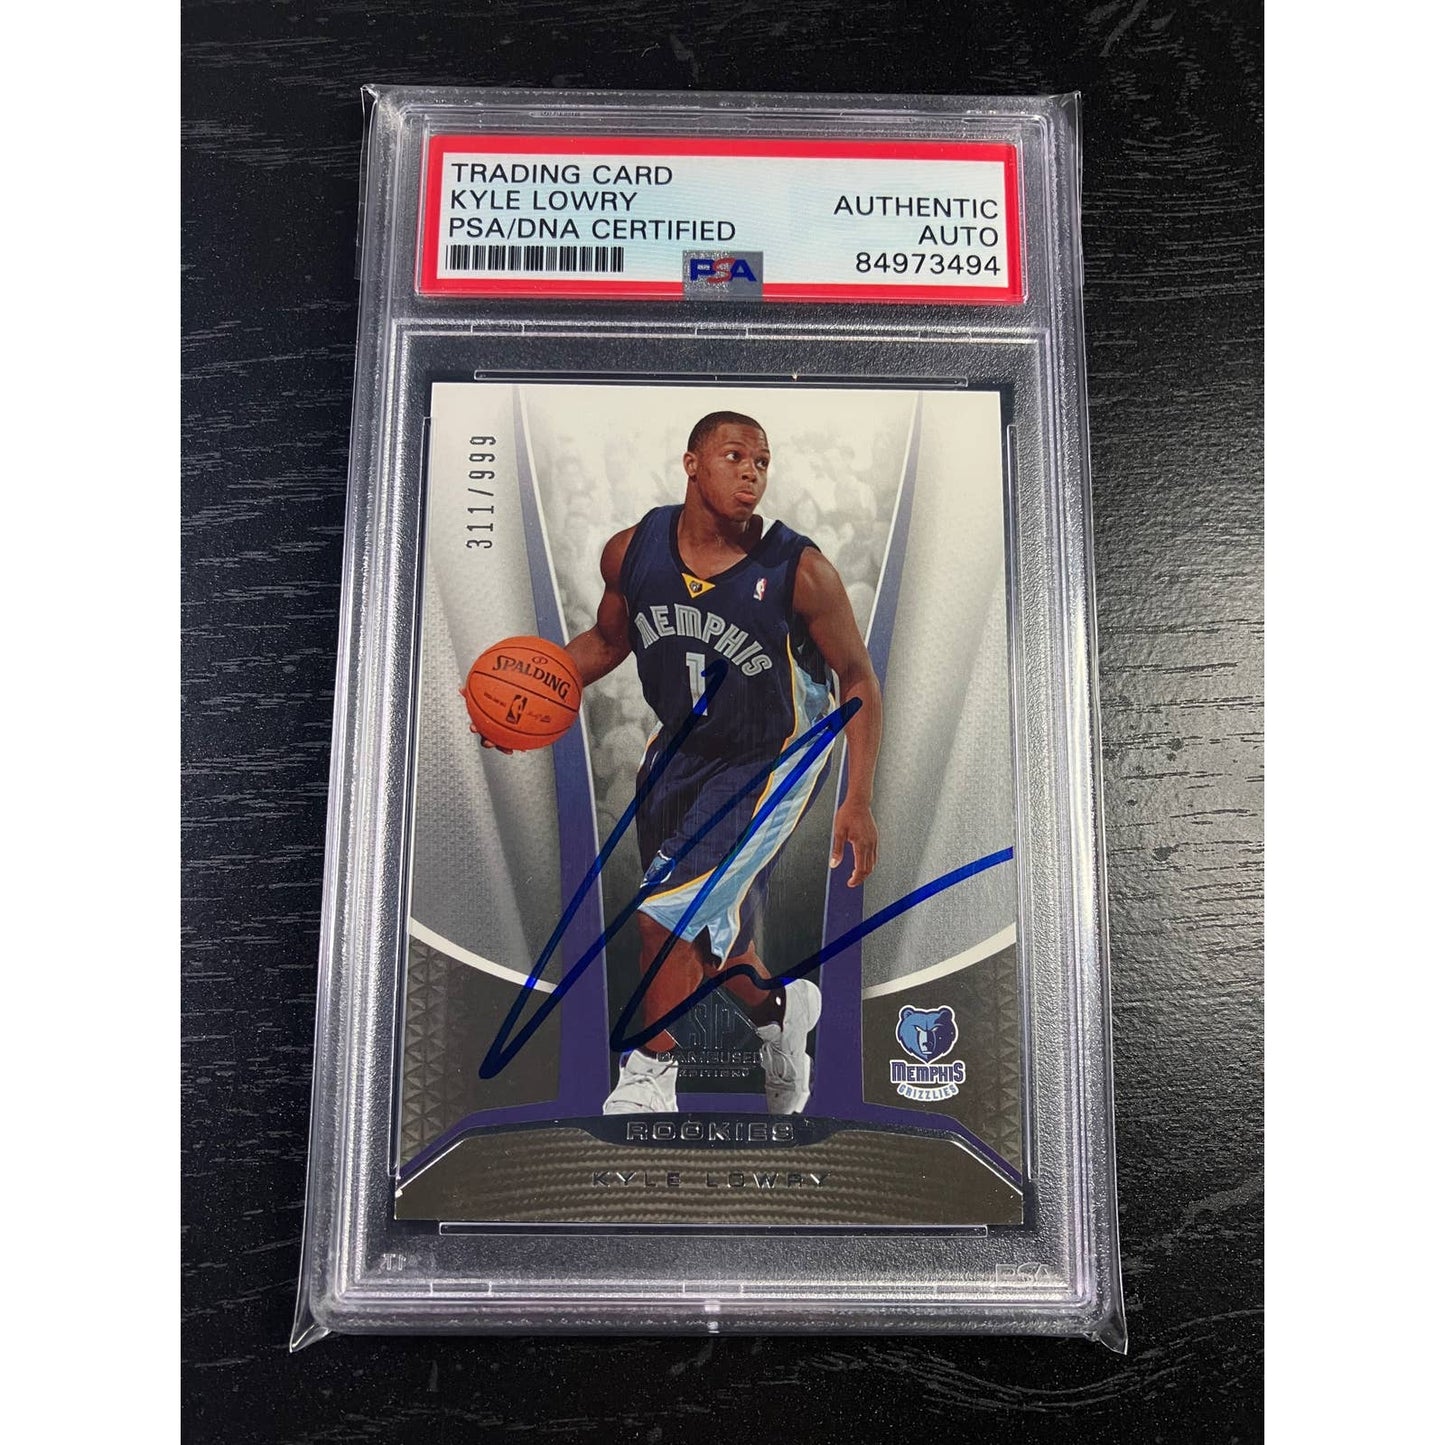 2006-07 Upper Deck SP Game Used Kyle Lowry Signed Rookie Card RC Auto /999 PSA/DNA